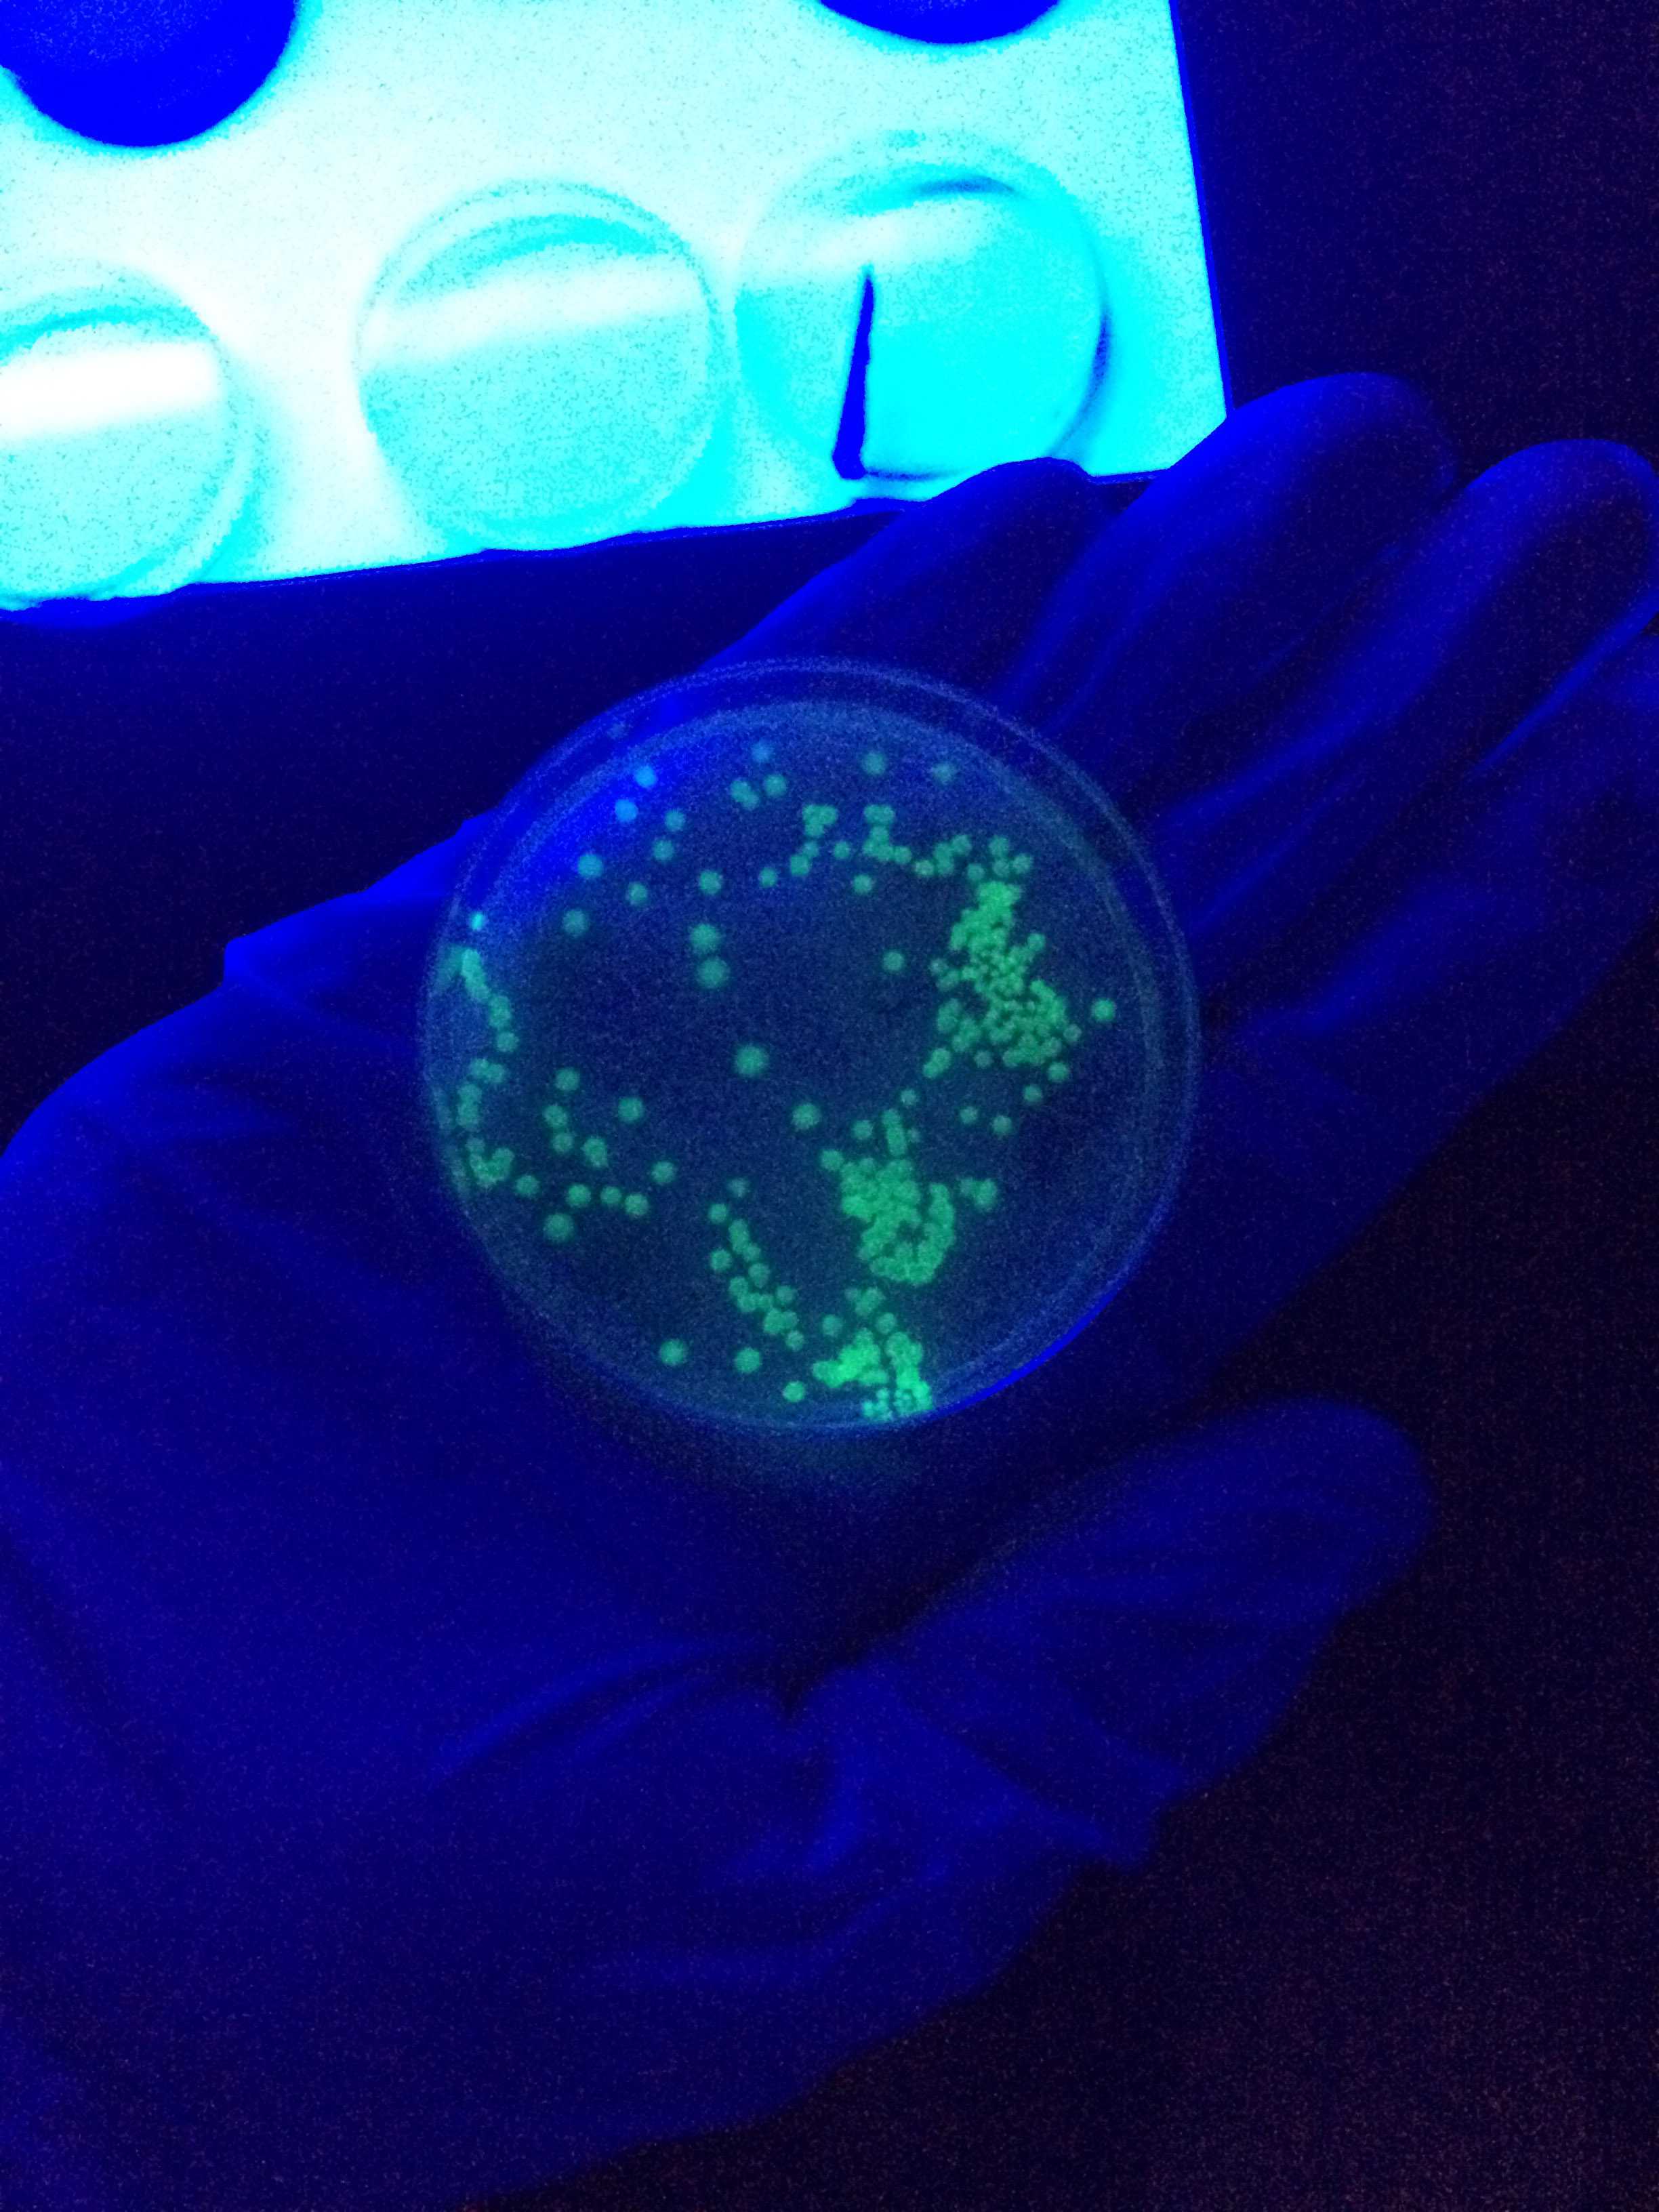 The LB-Ampicillian-Arabinos plate displayed glowing bacteria following the first experiment, a bacterial transformation, that John Yundt-Pacheco helped with.